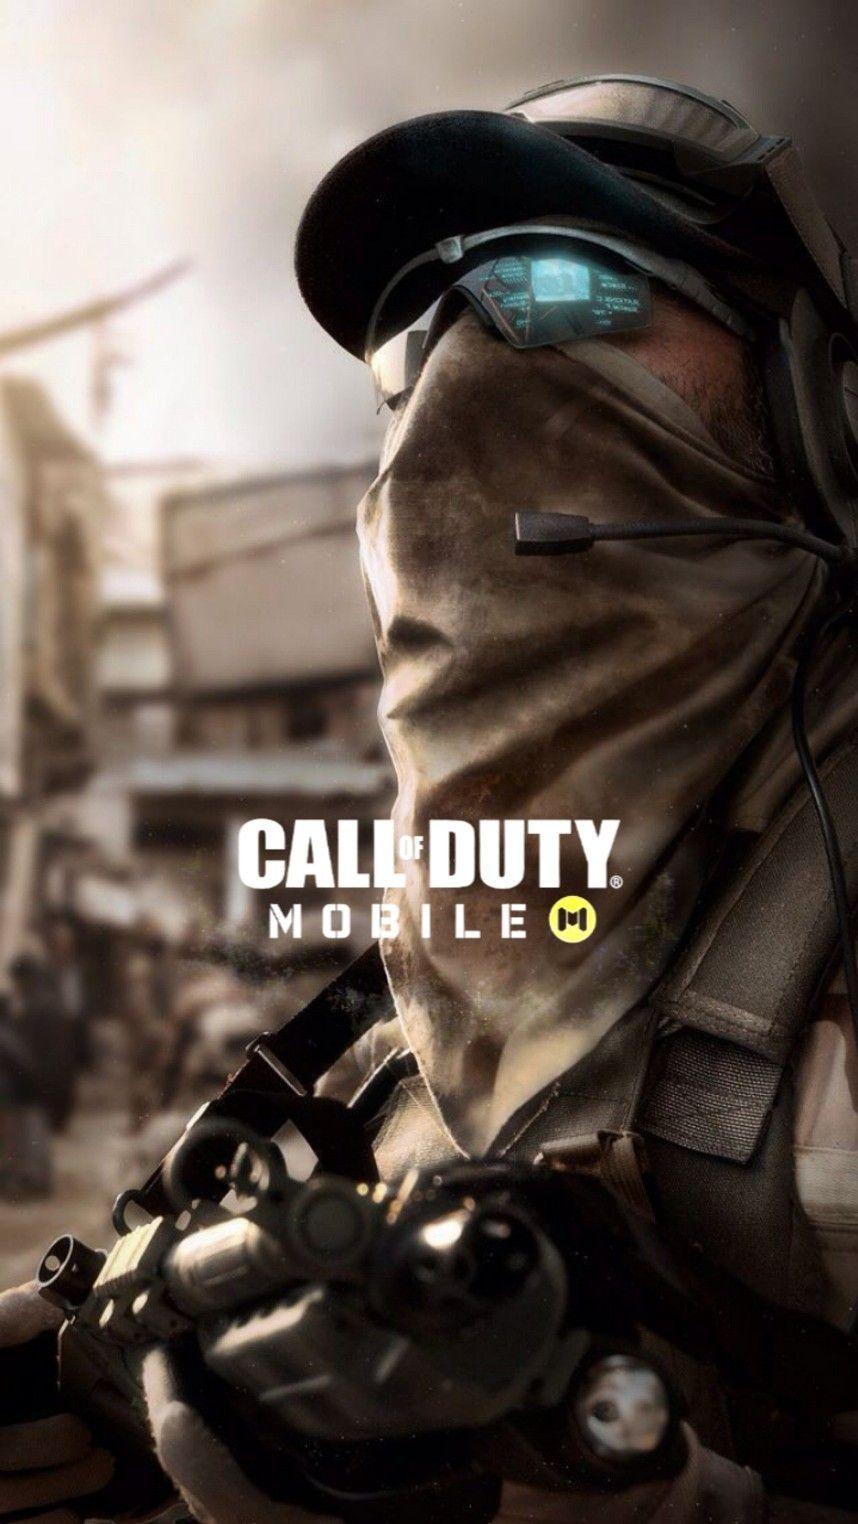 858x1524 Hình nền Call Of Duty Mobile.  Call of duty, Cod game, Mobile logo